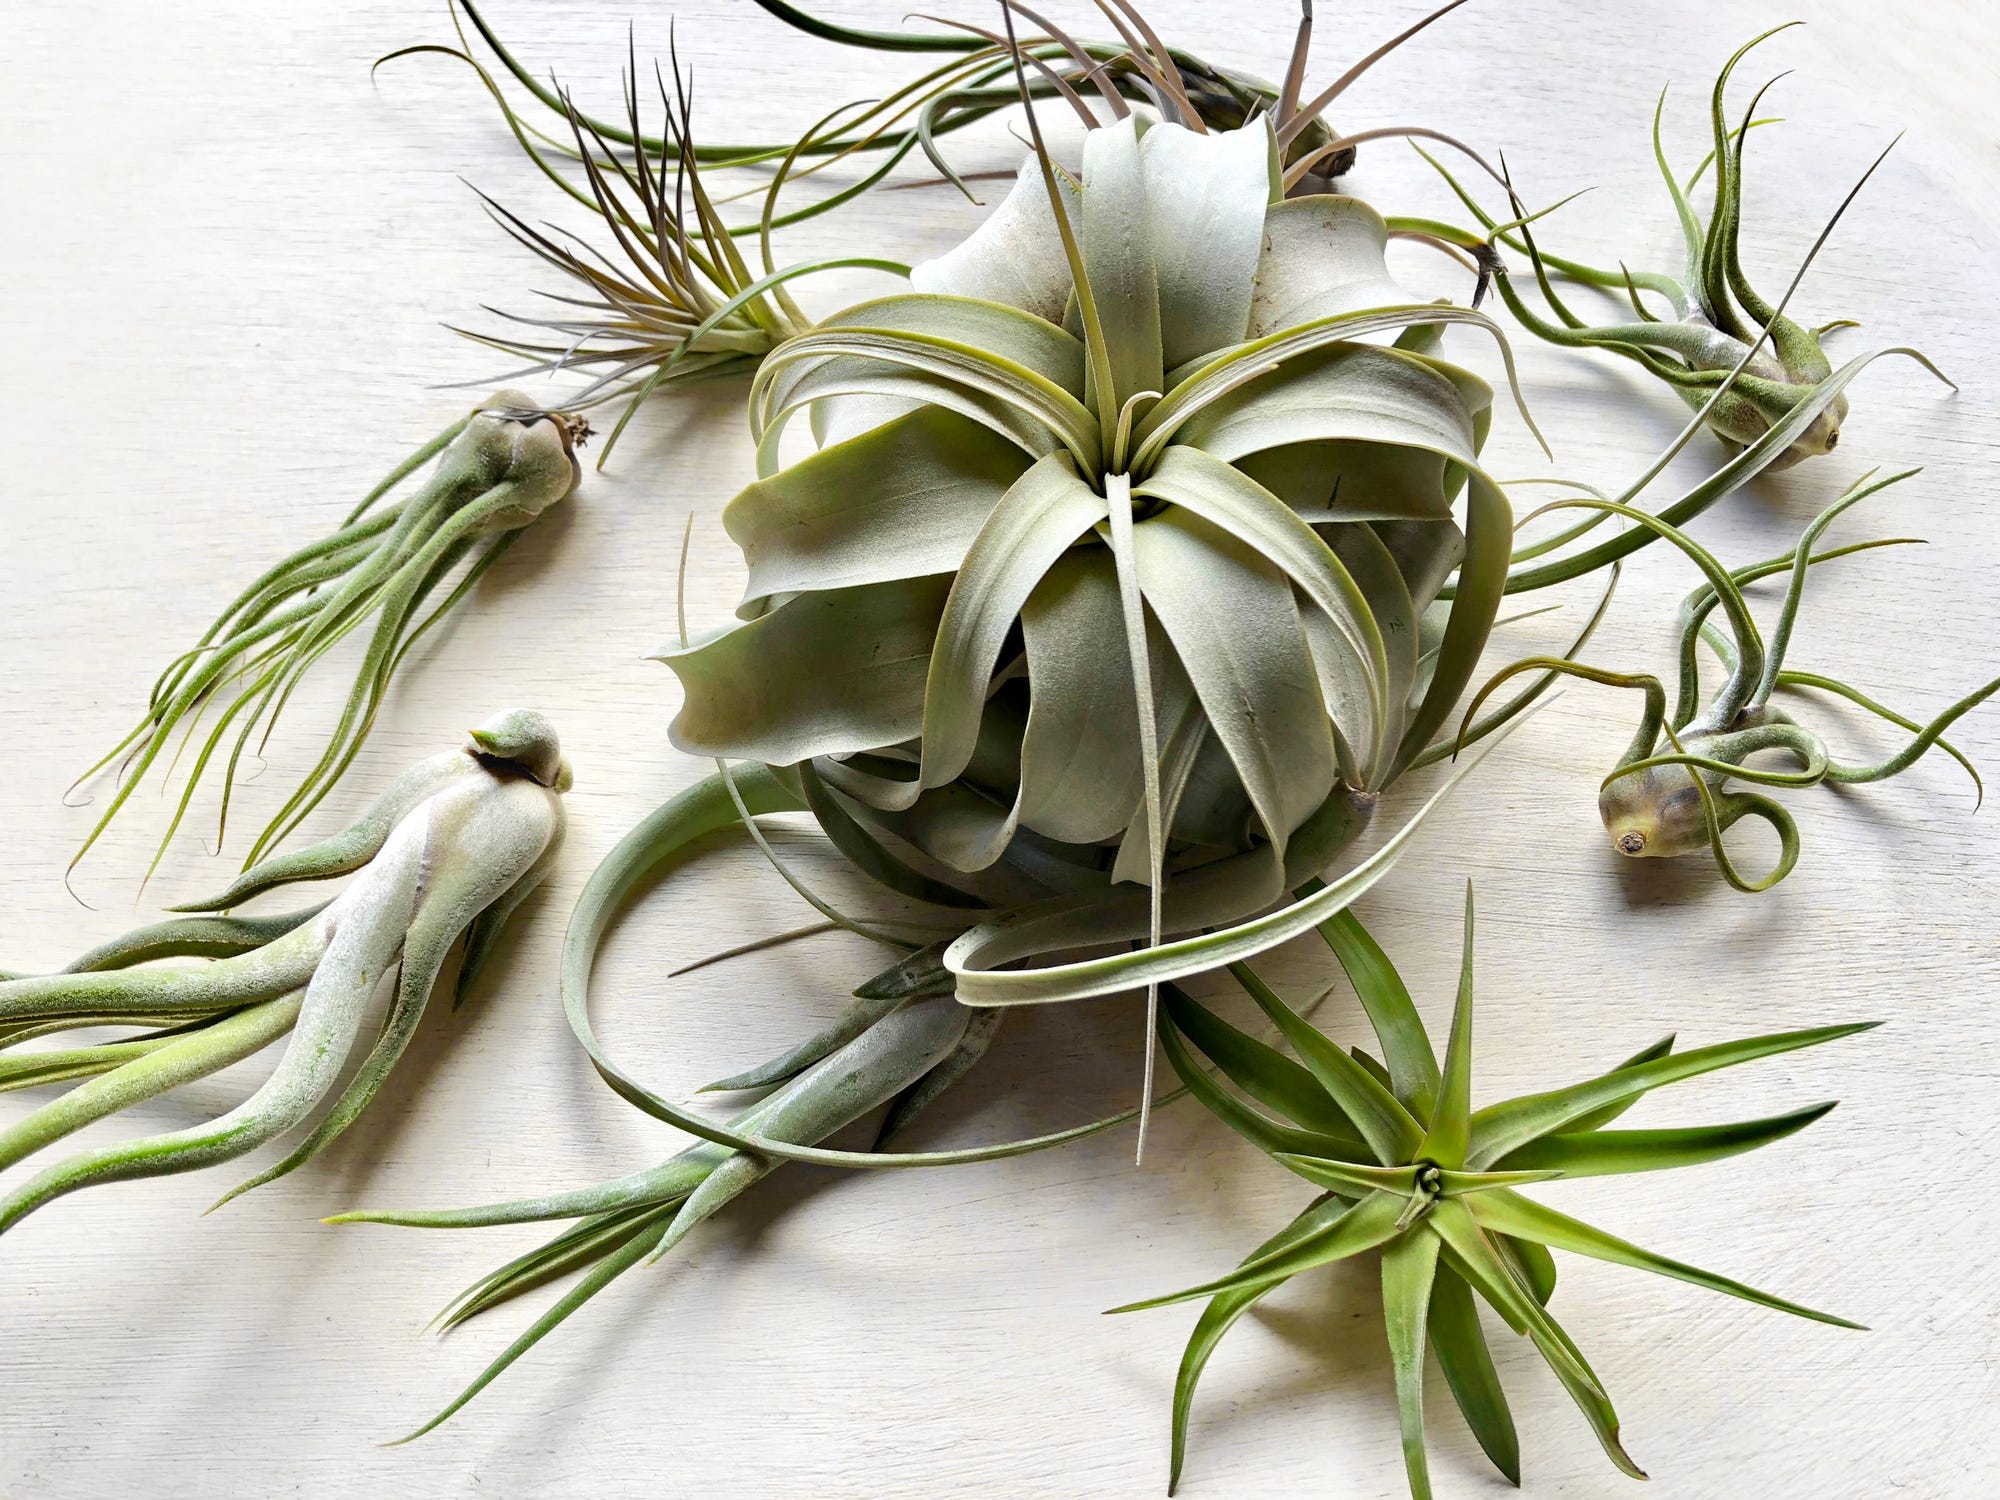 Different varieties of air plants displayed on a table